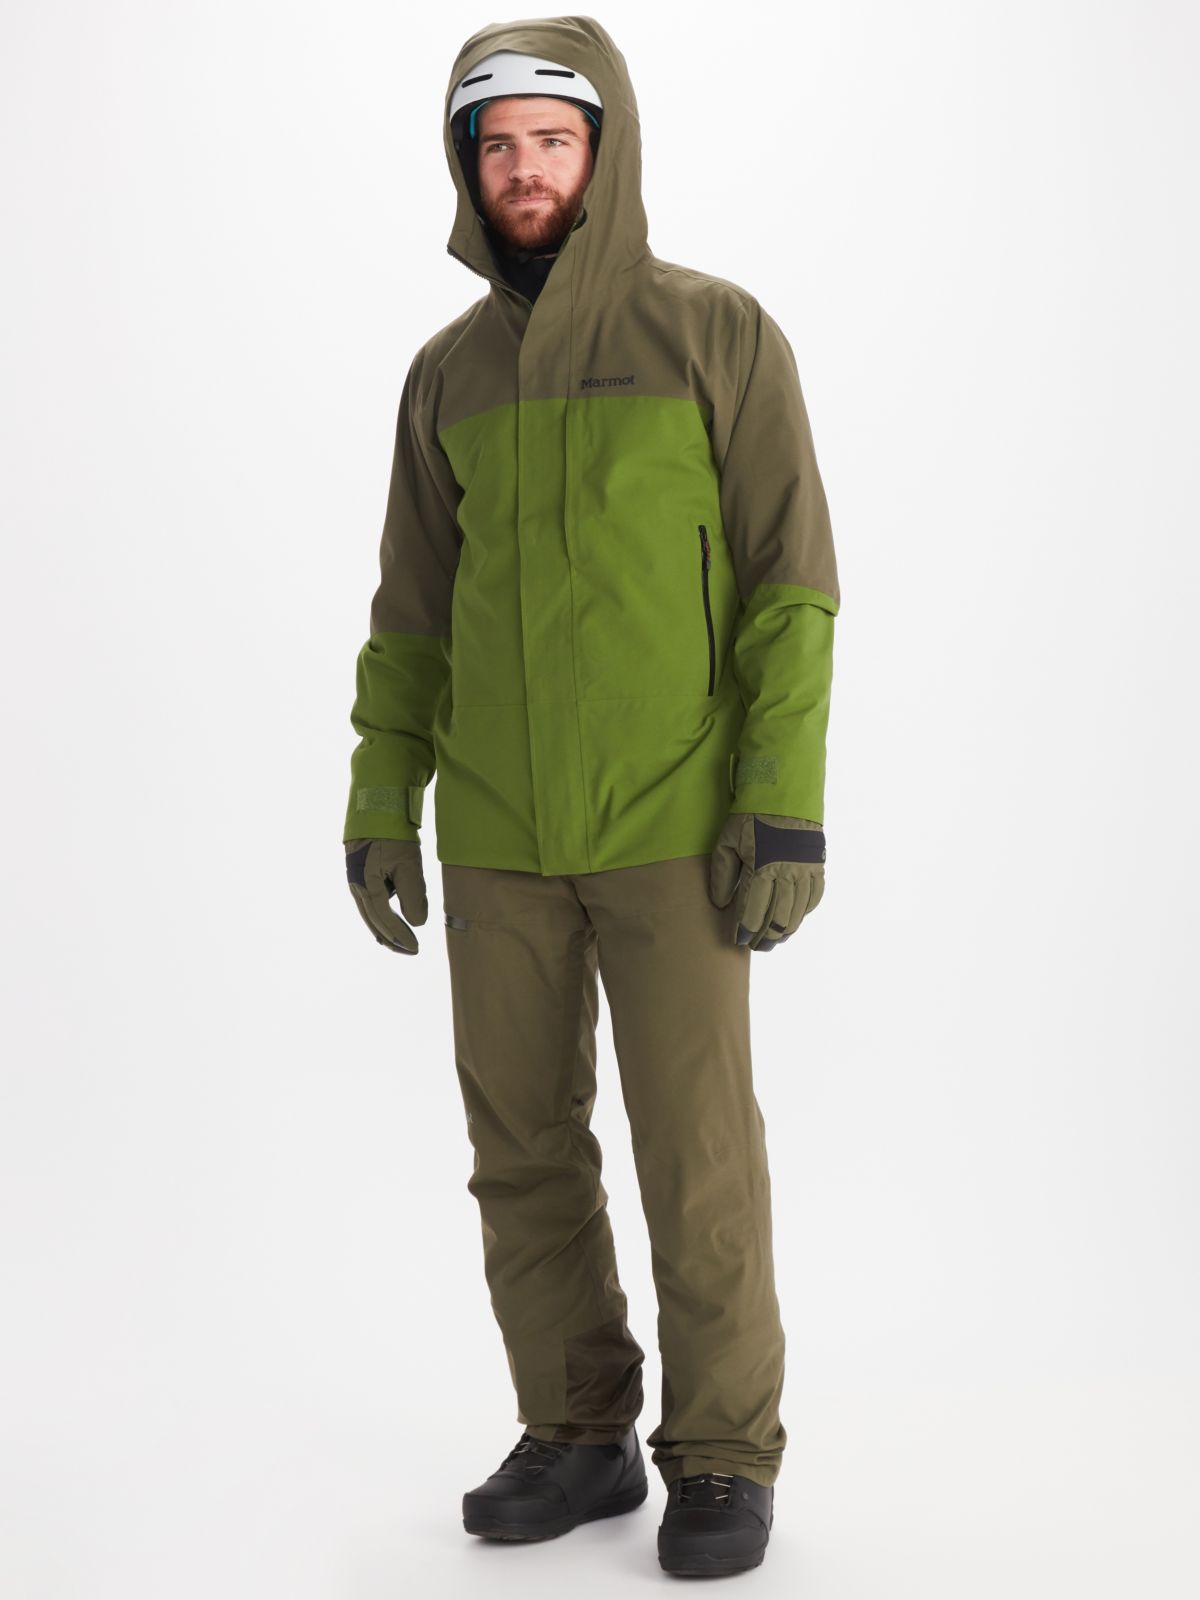 Man in hooded jacket and hiking pants